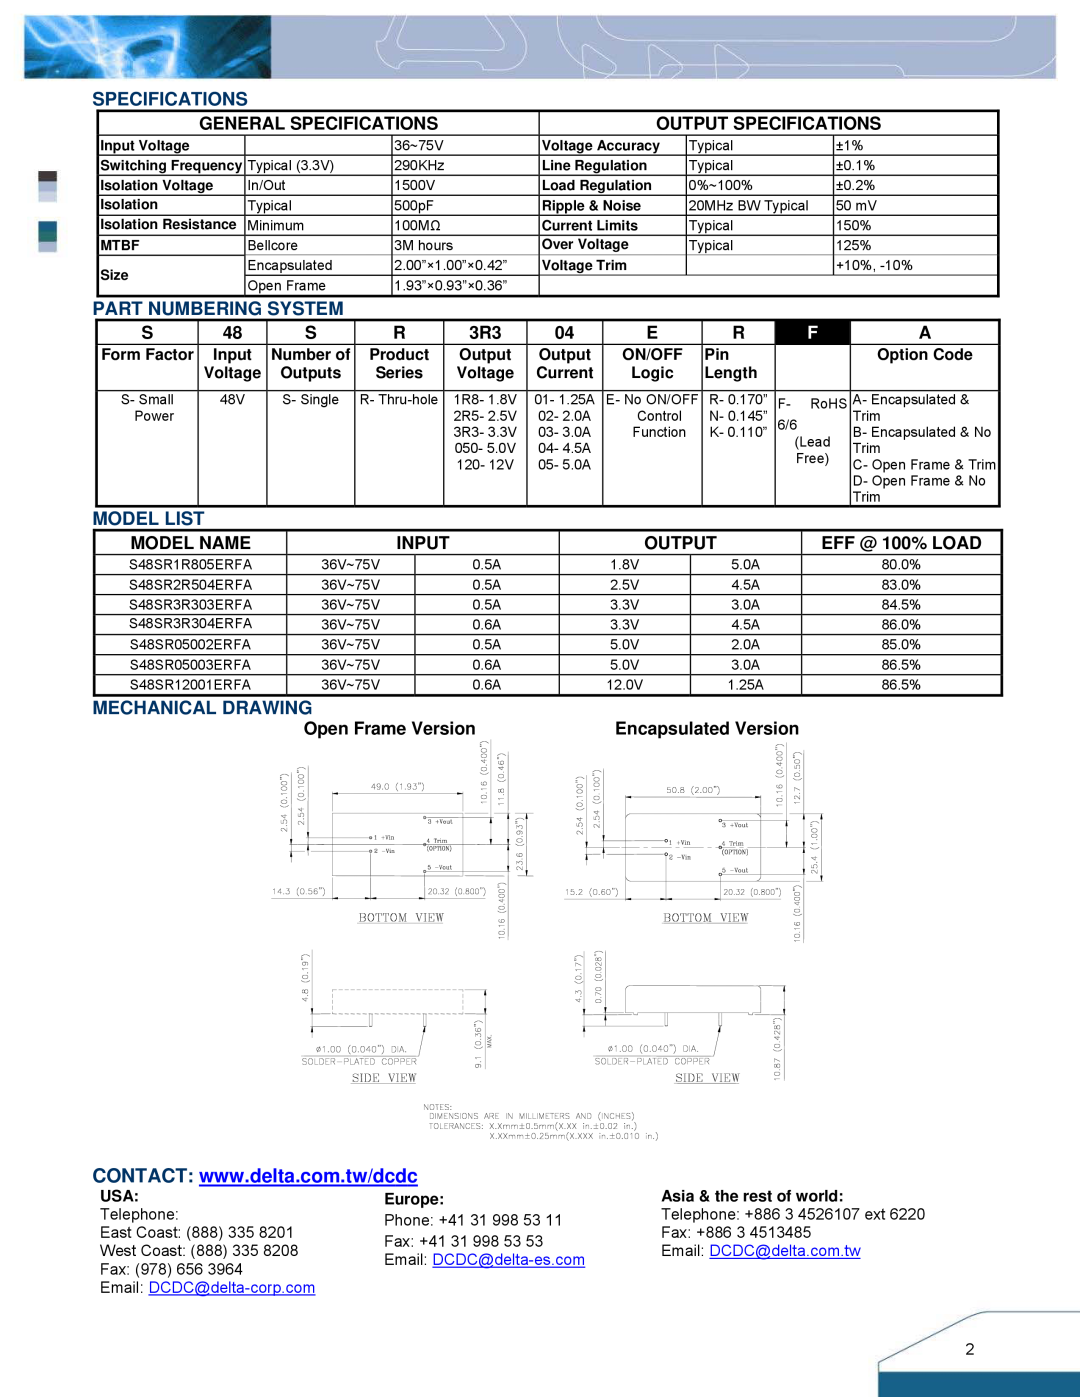 Delta Electronics S48SR manual Specifications, System, Mechanical Drawing 